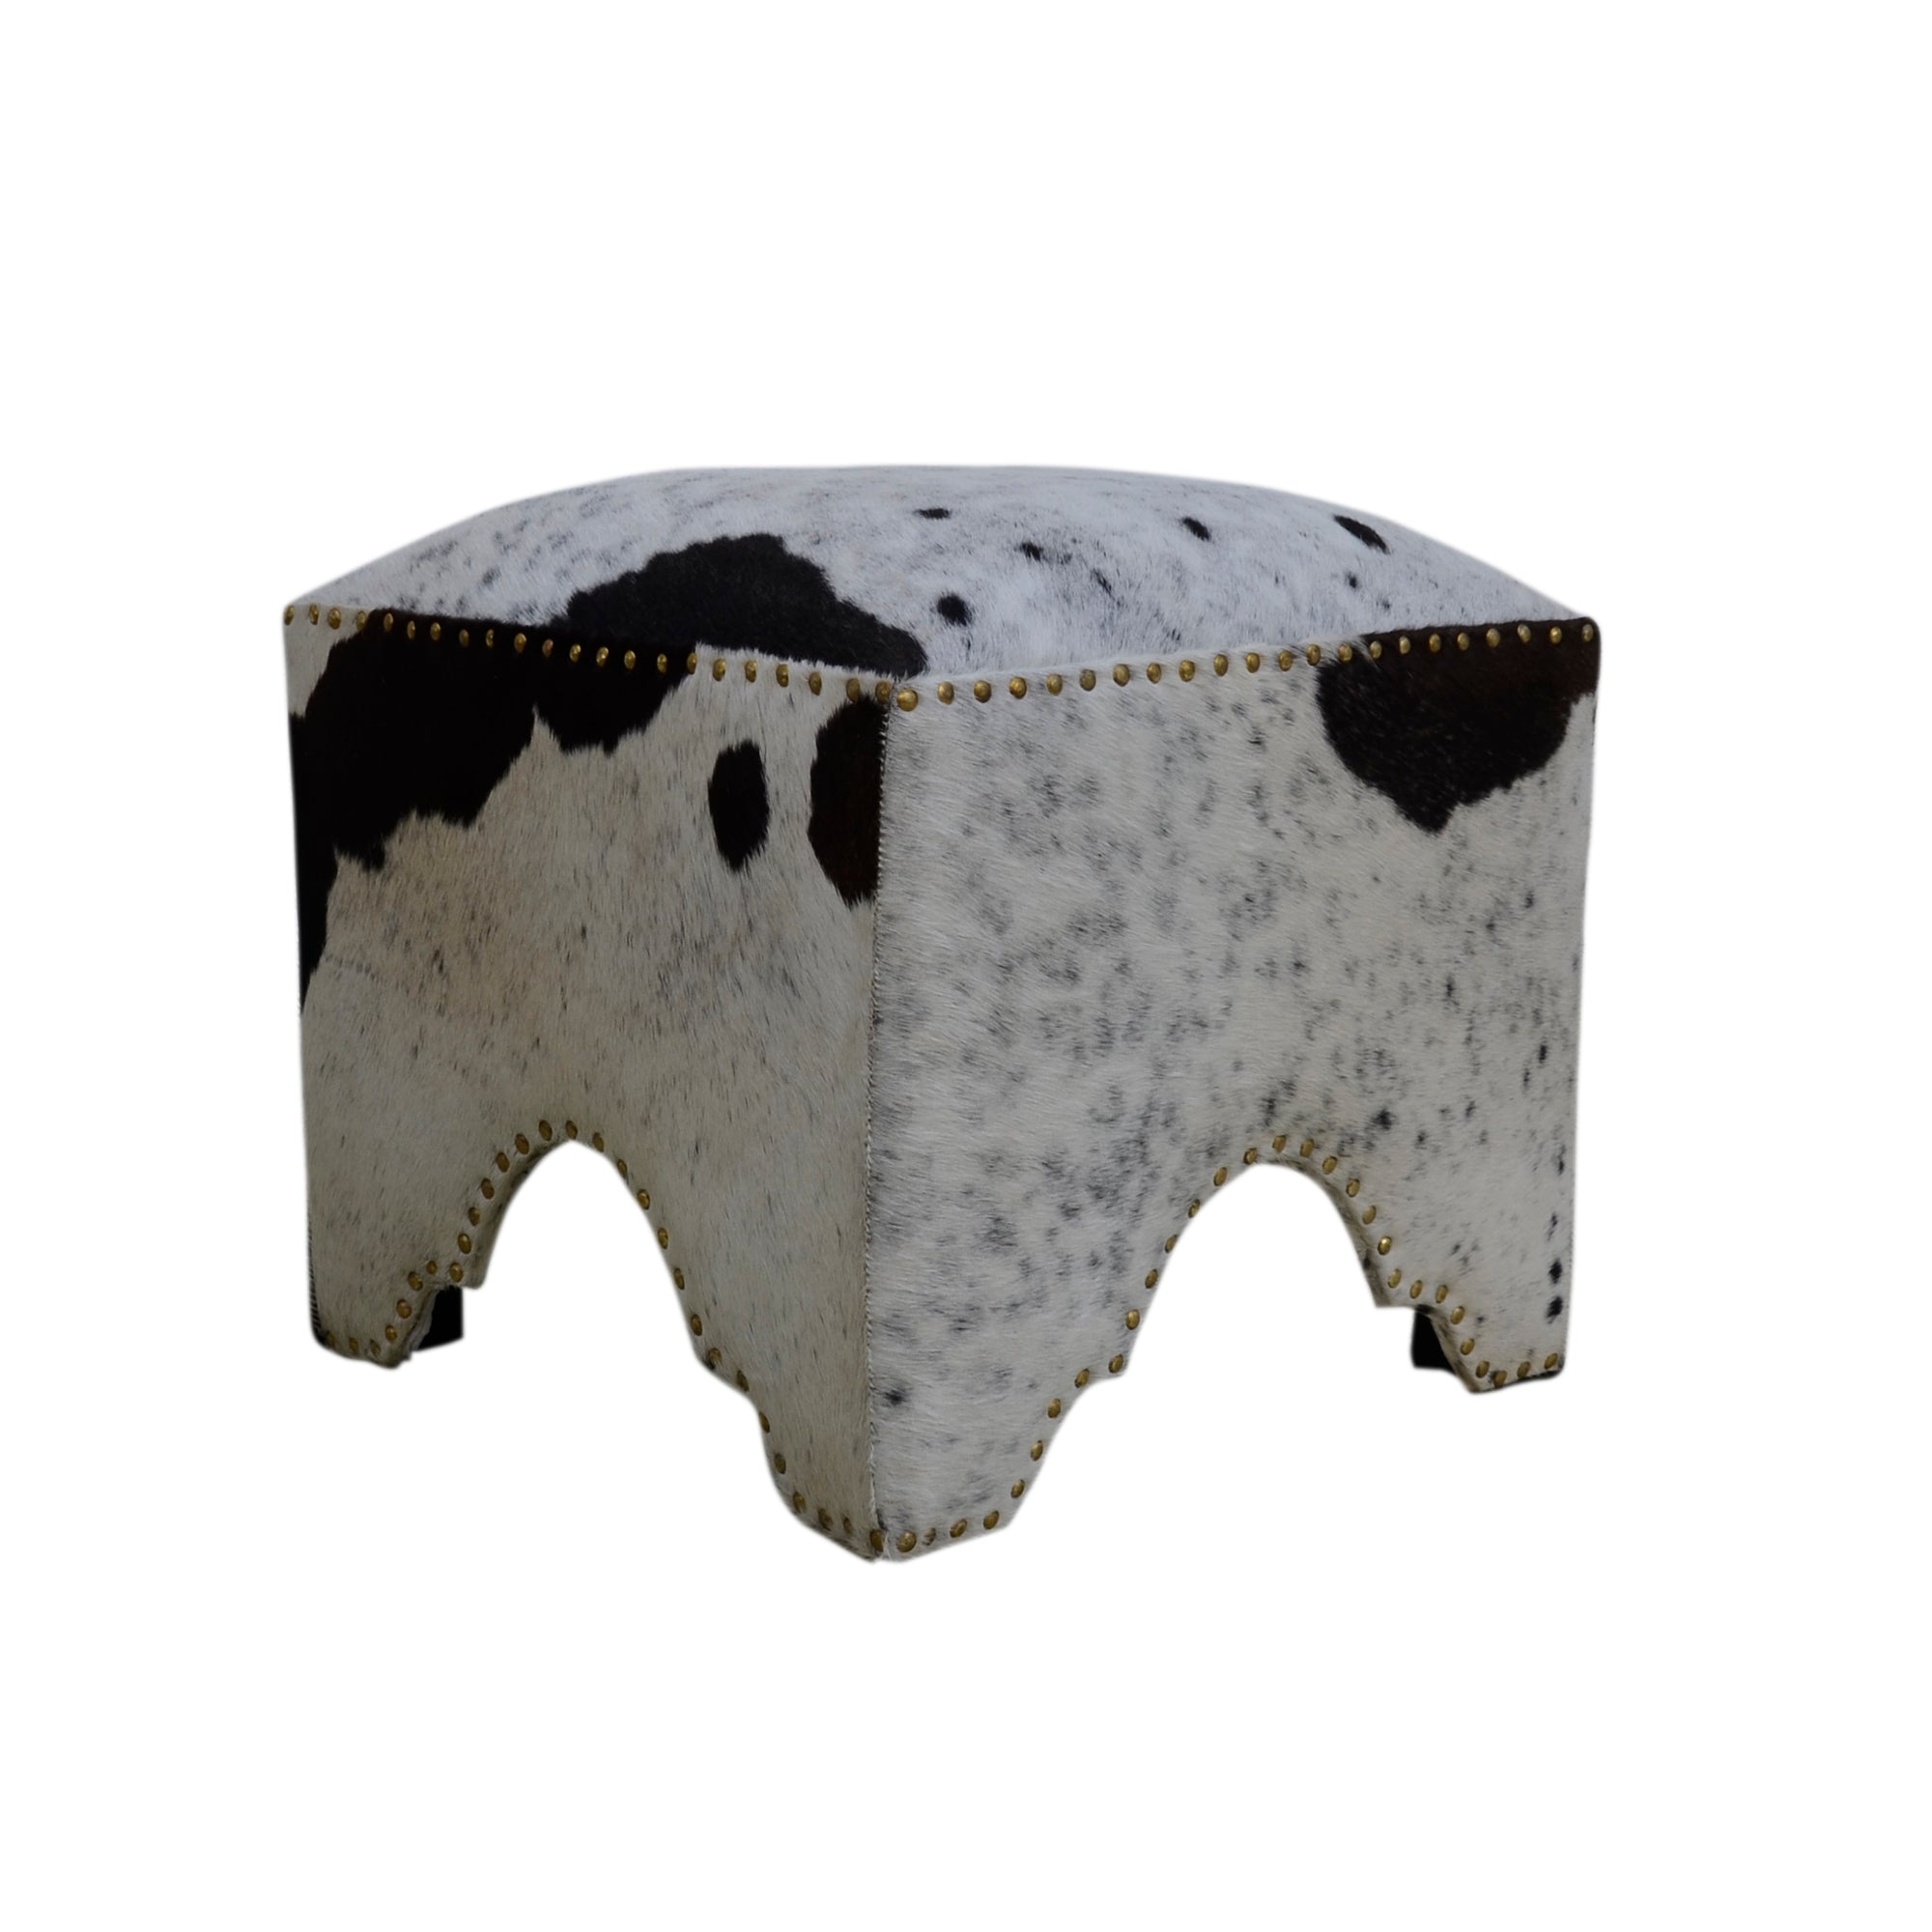 Hand Made Hand Crafted Cow Ottoman - decorstore